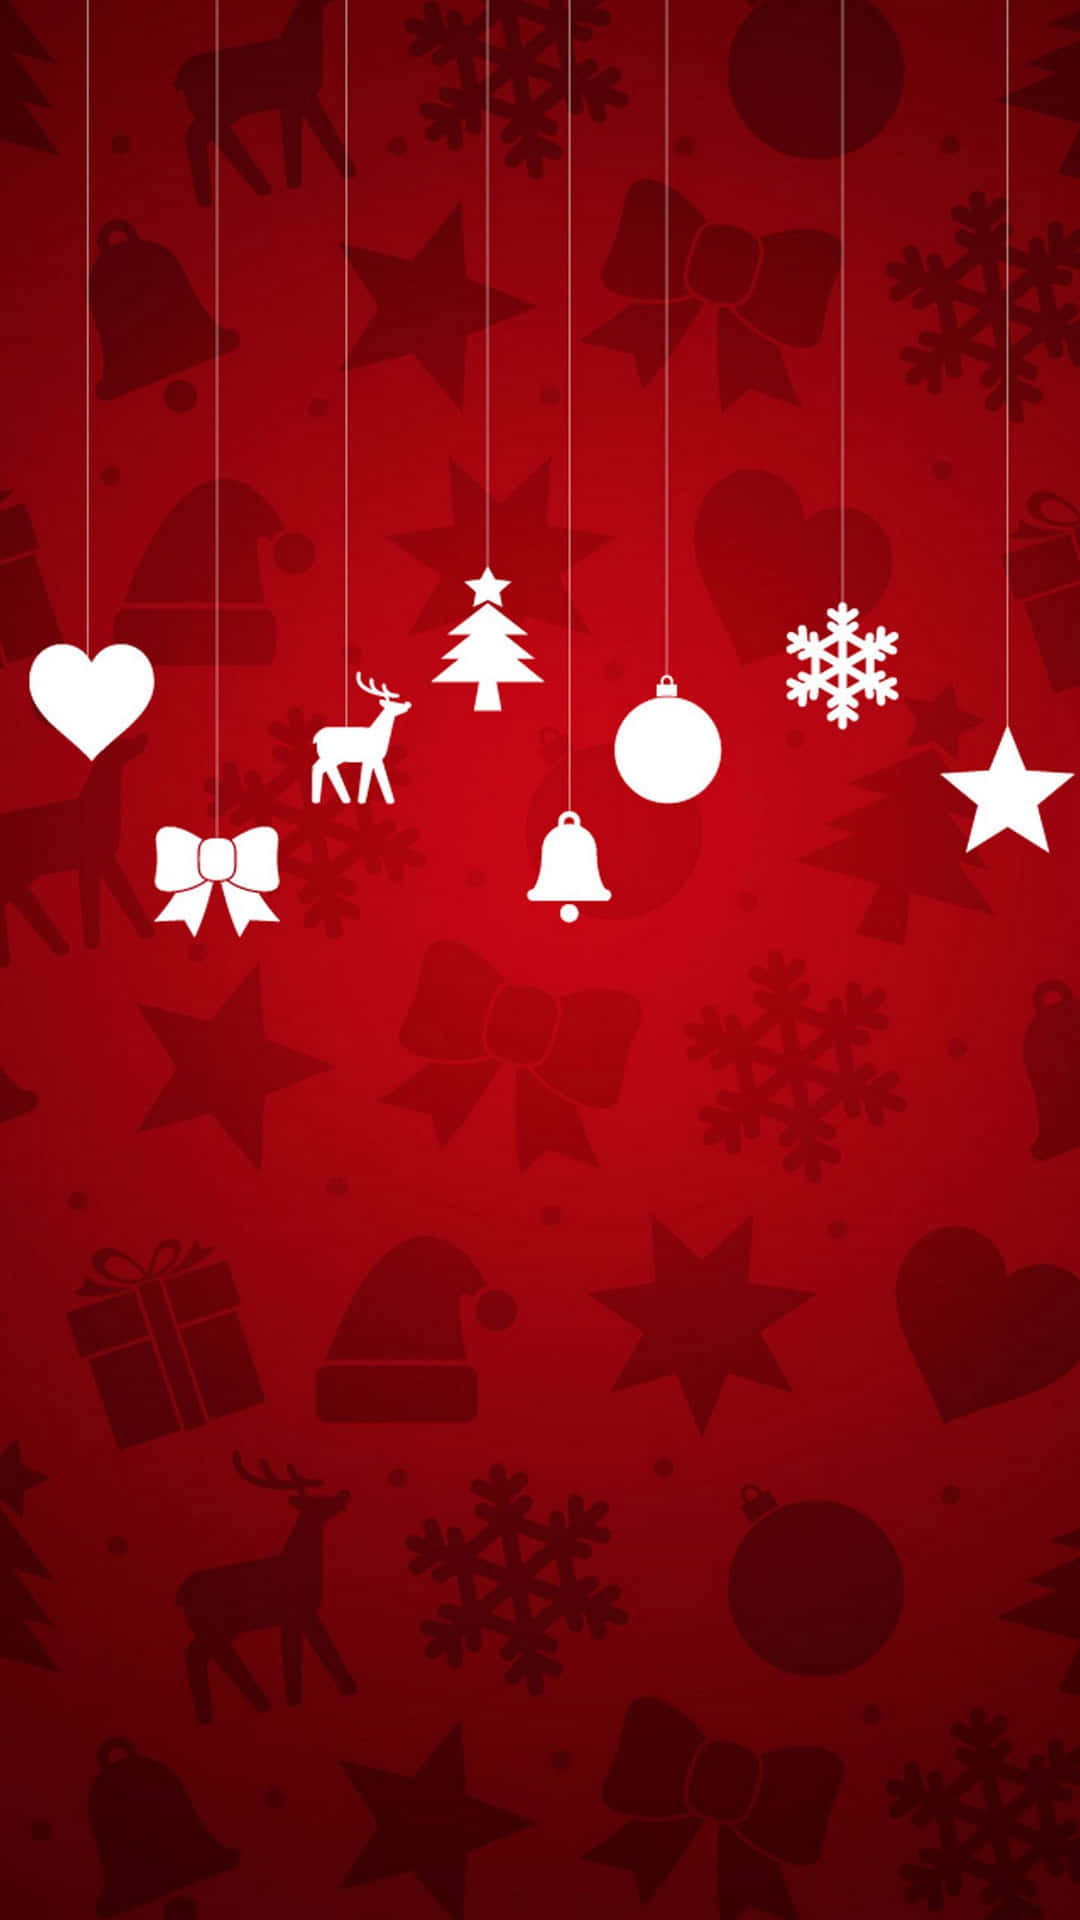 Christmas Decorations On A Red Background